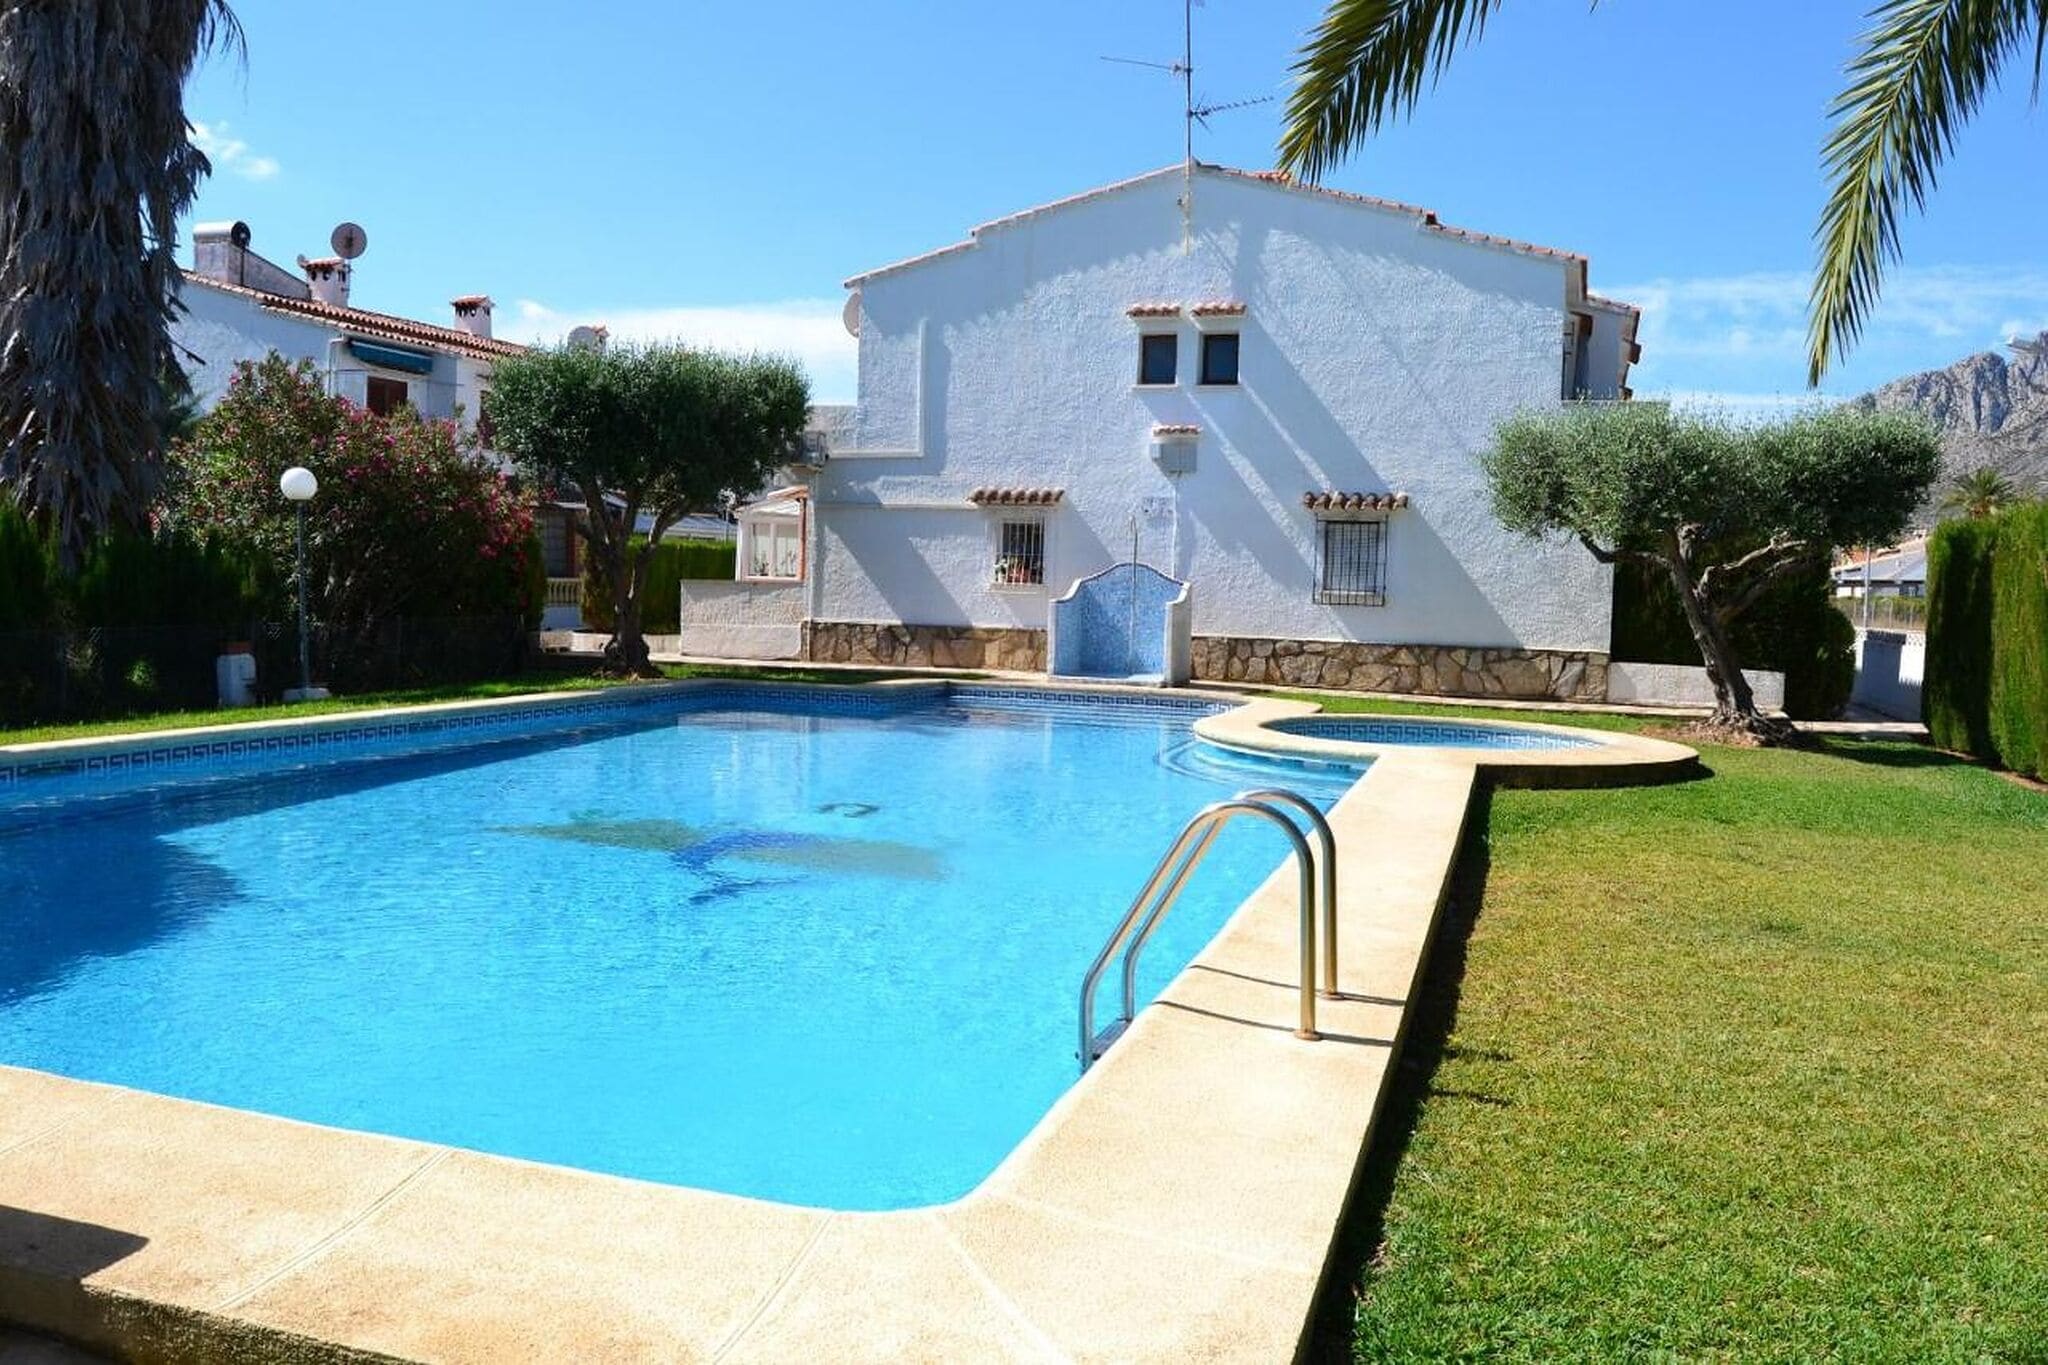 Inviting holiday home in Els Poblets near the sea